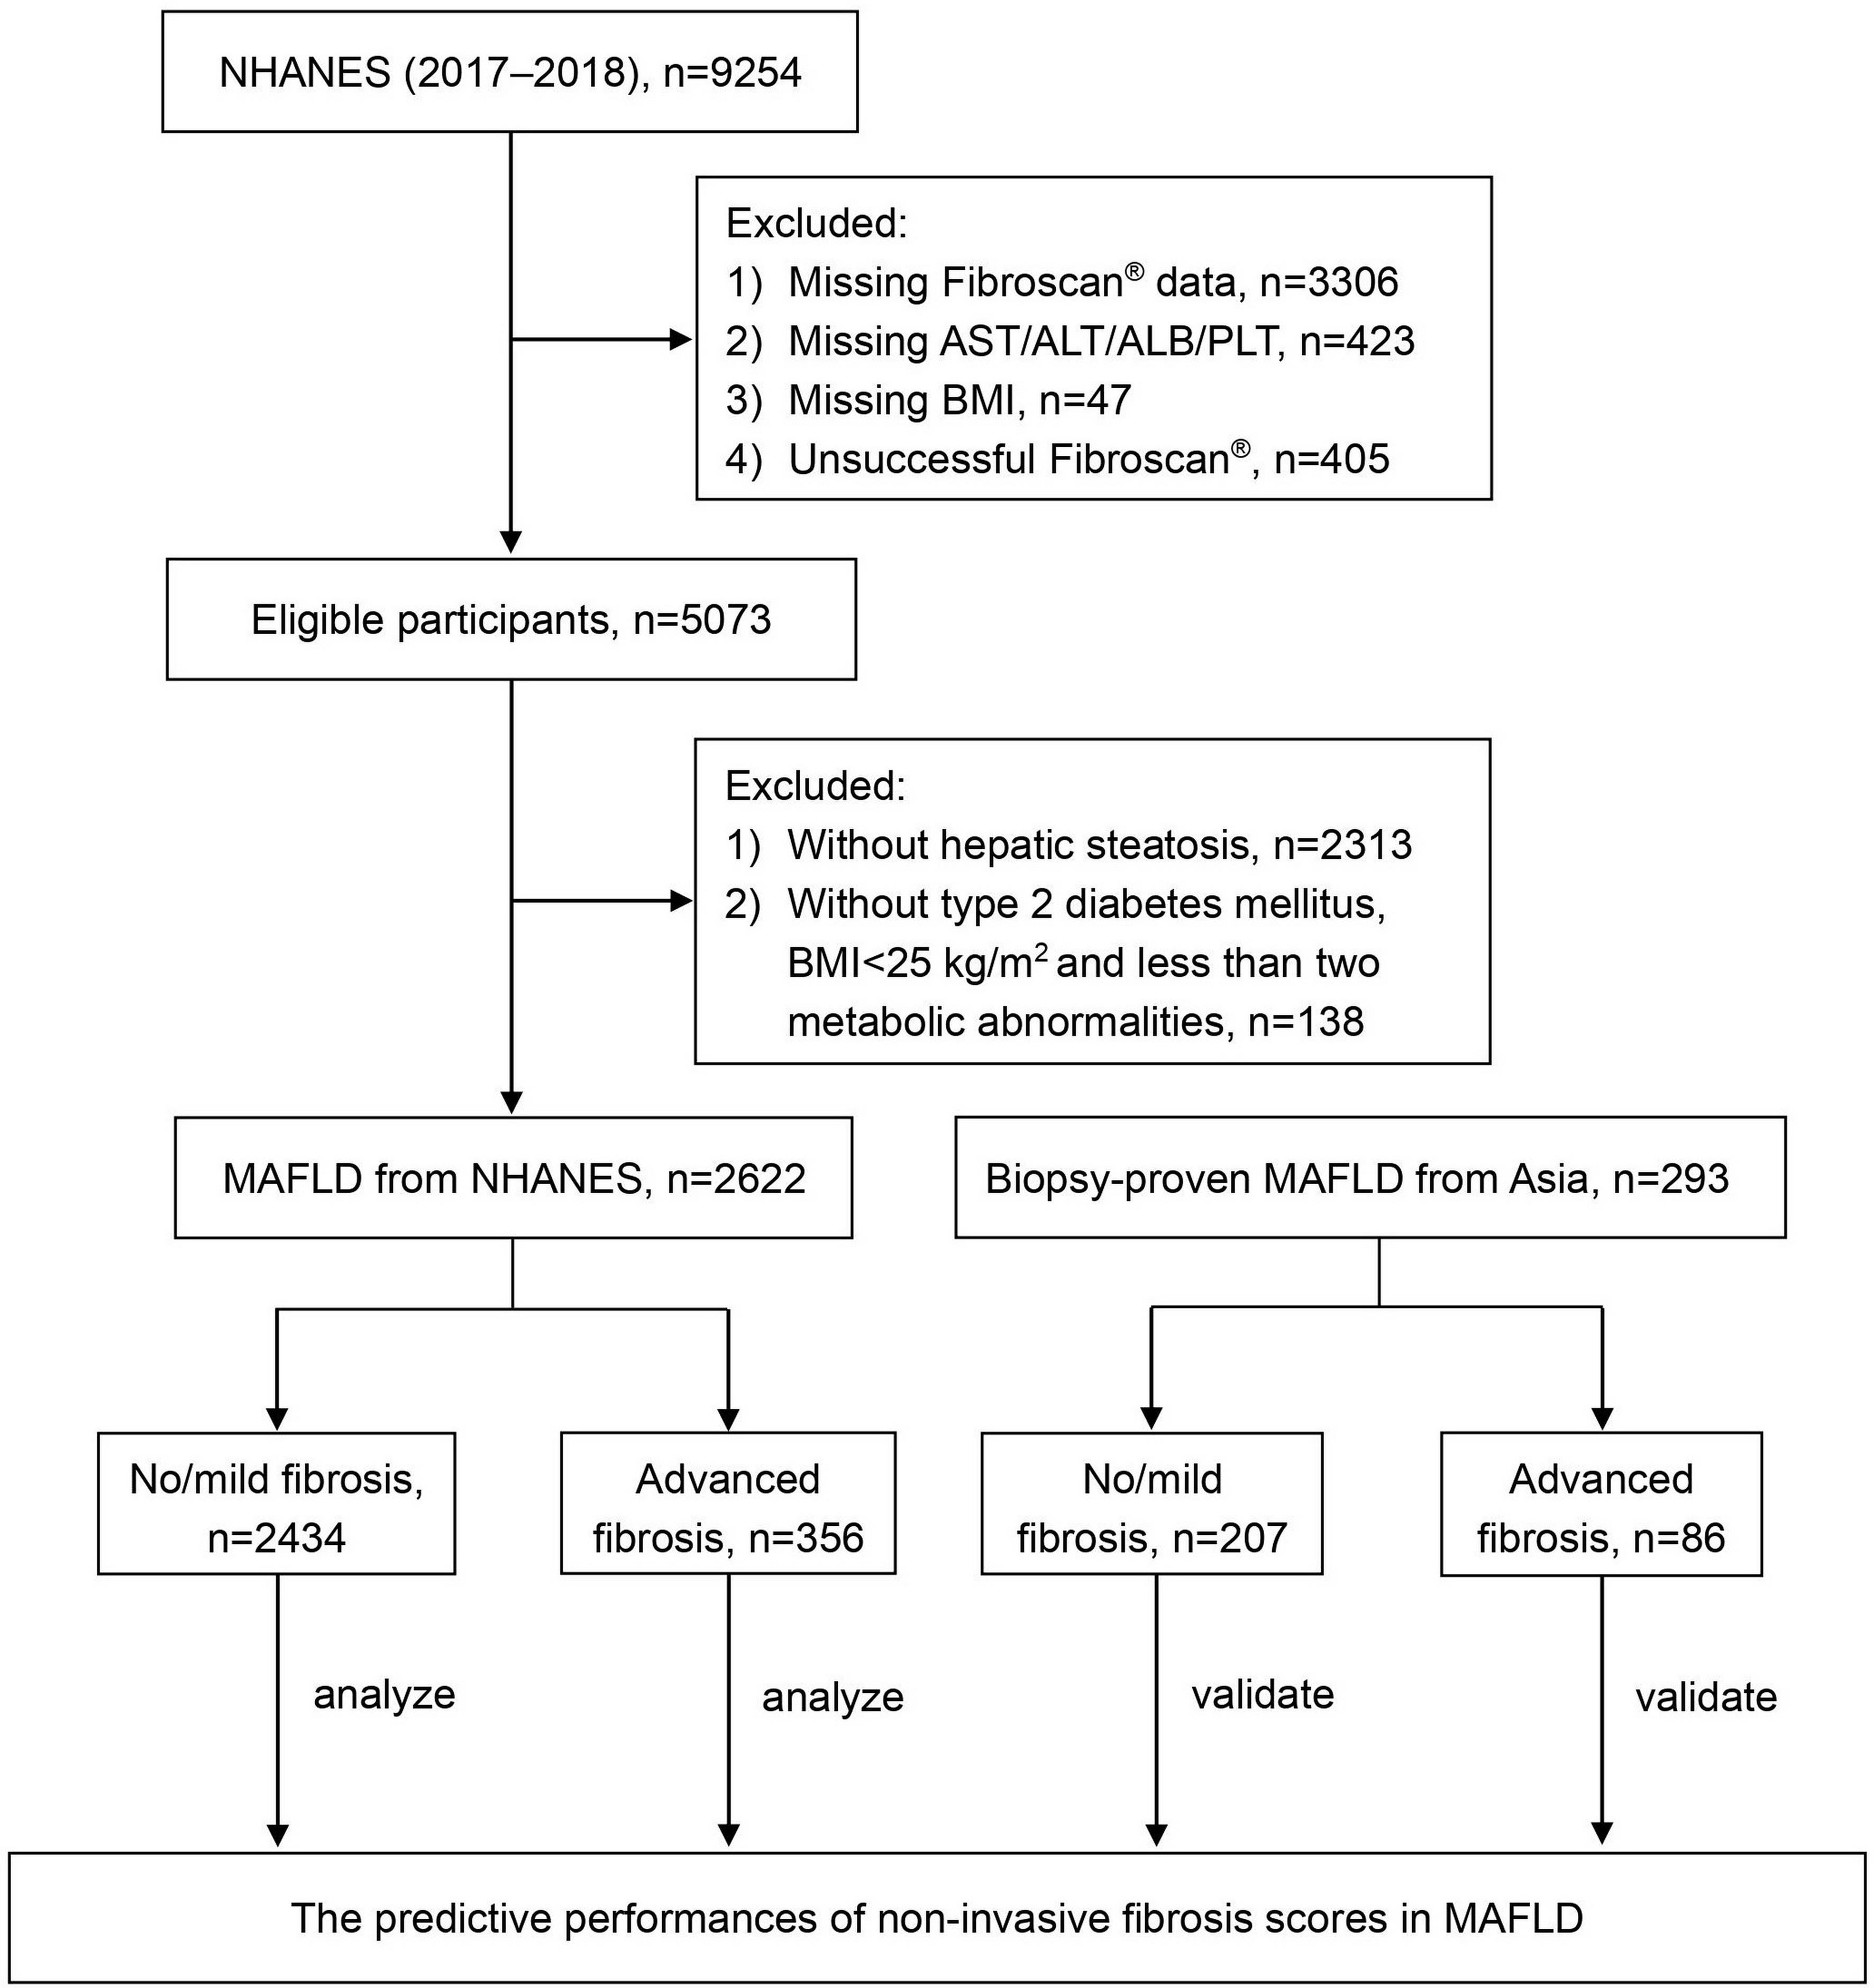 Flowchart for the analysis and validation of noninvasive fibrosis scores for predicting advanced fibrosis in MAFLD.